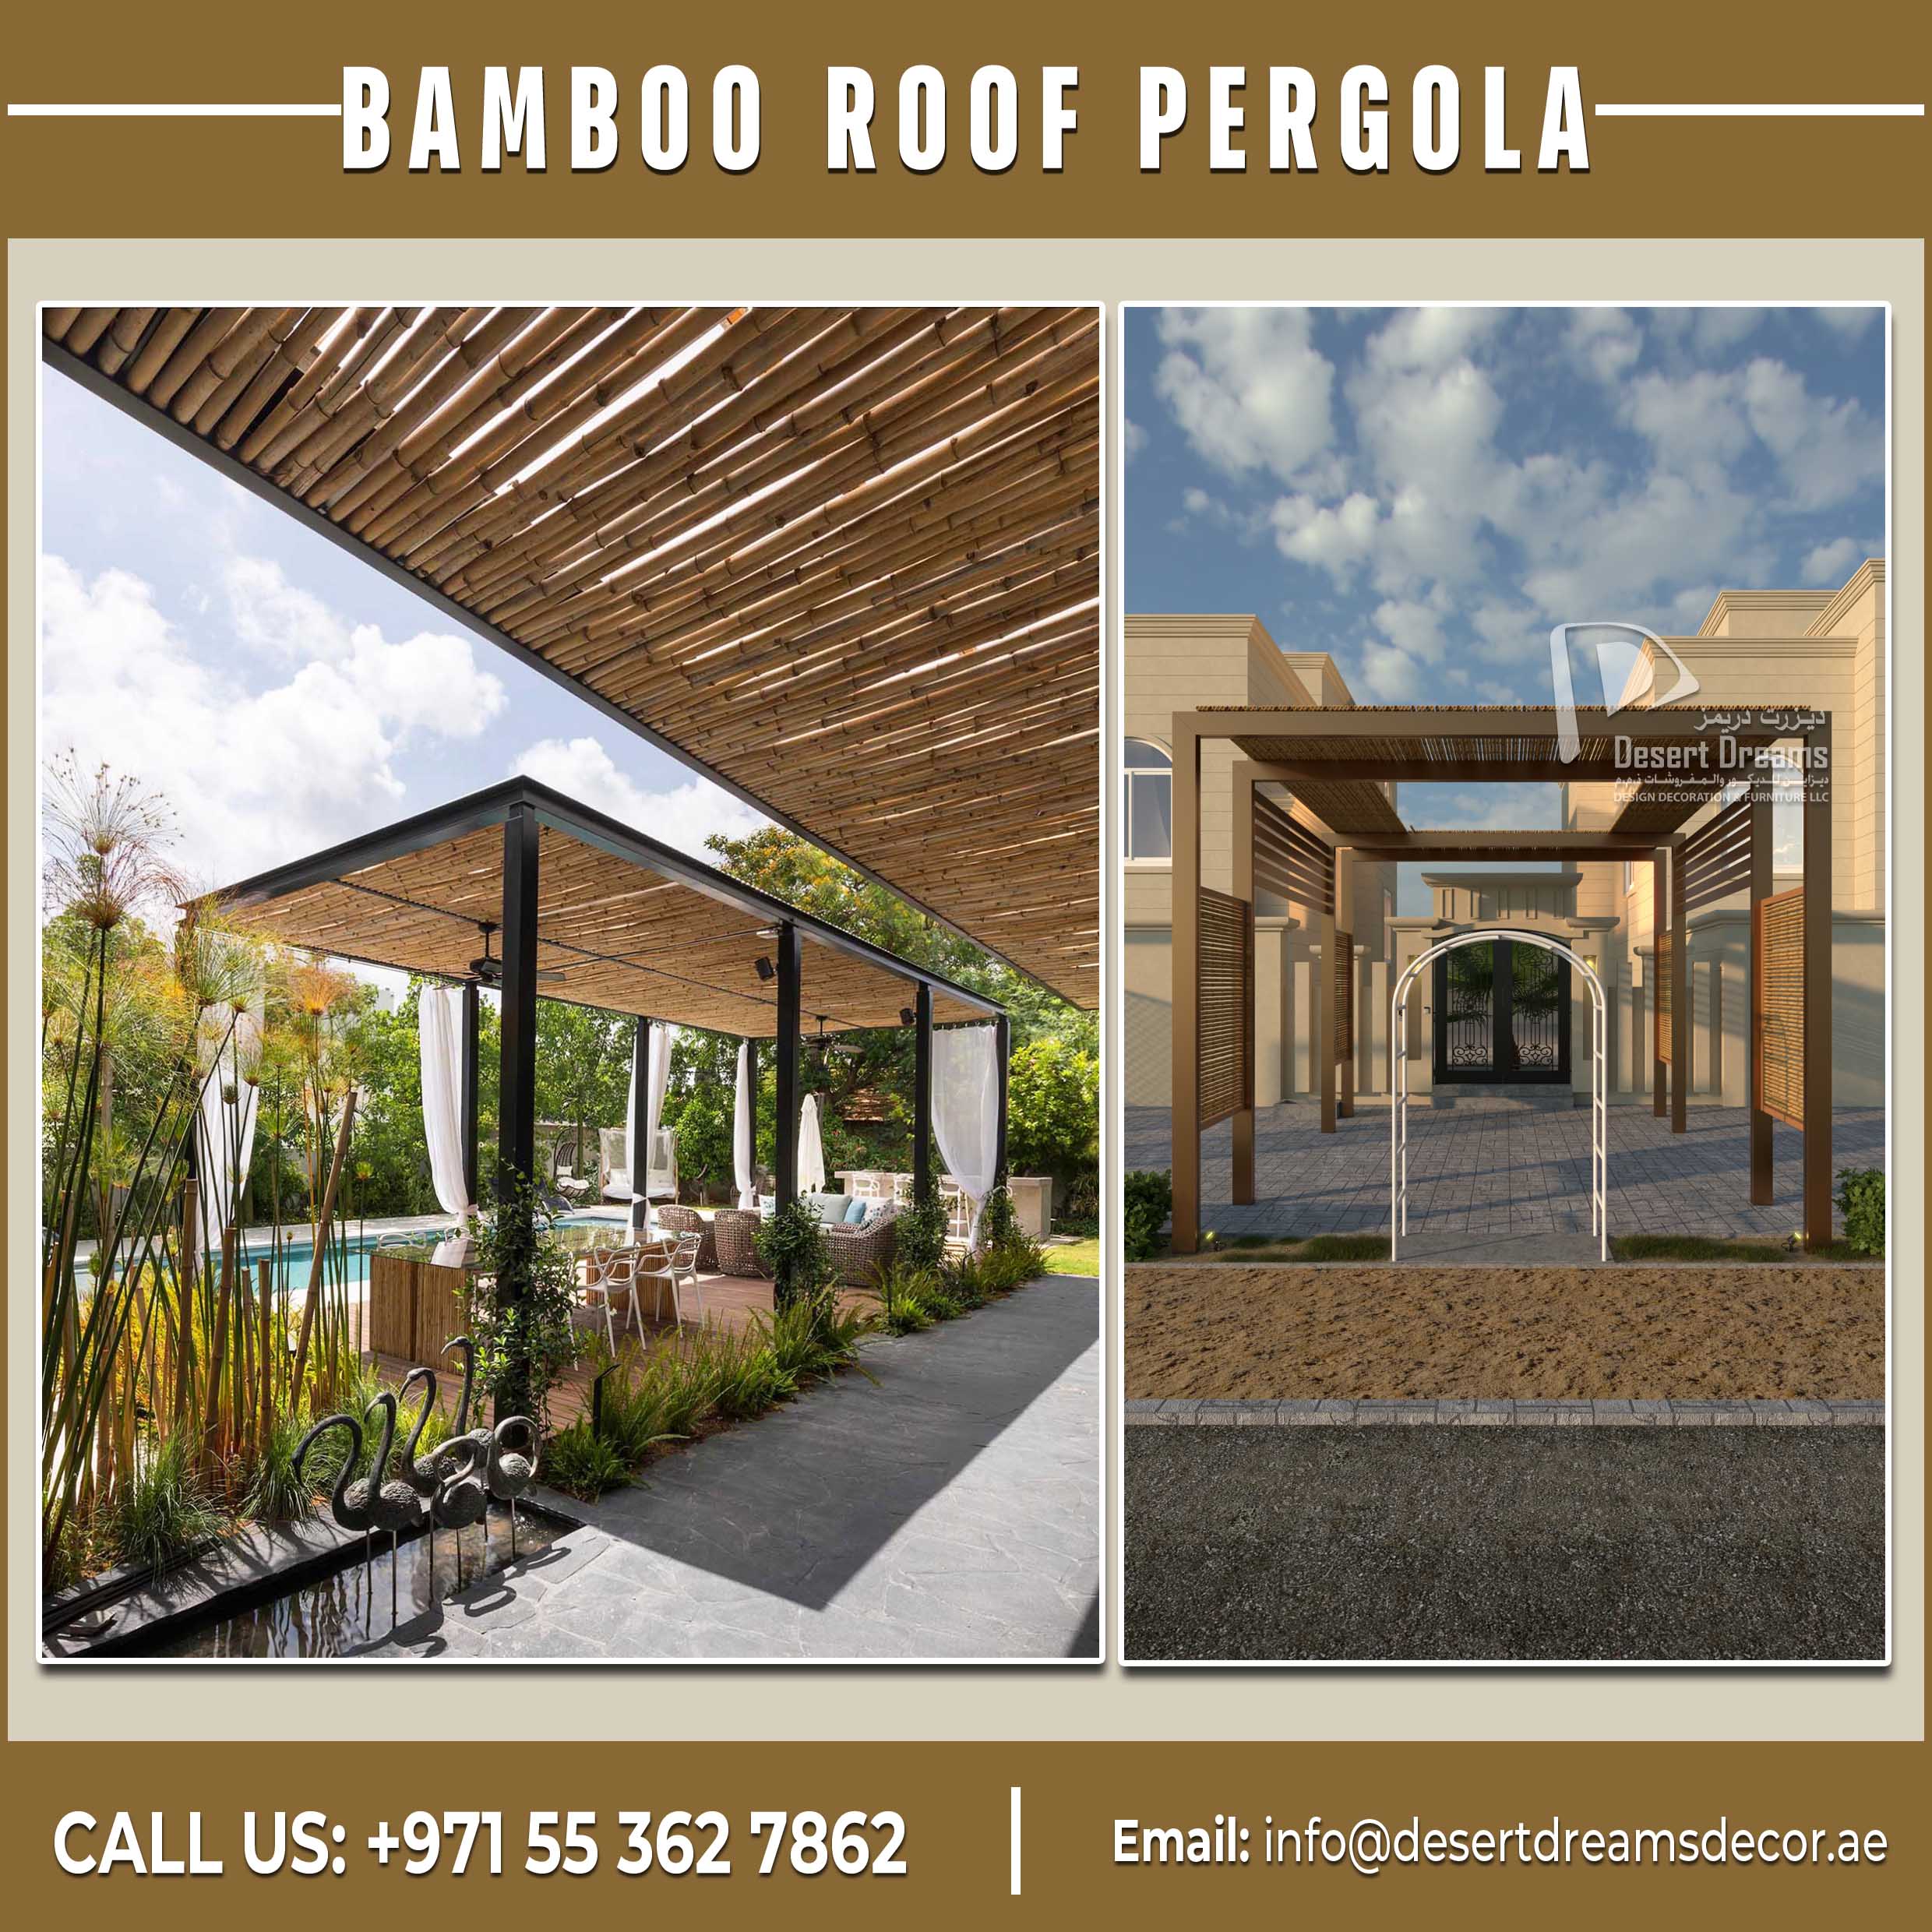 Supply and Install Bamboo Roofing Pergola in UAE (3).jpg